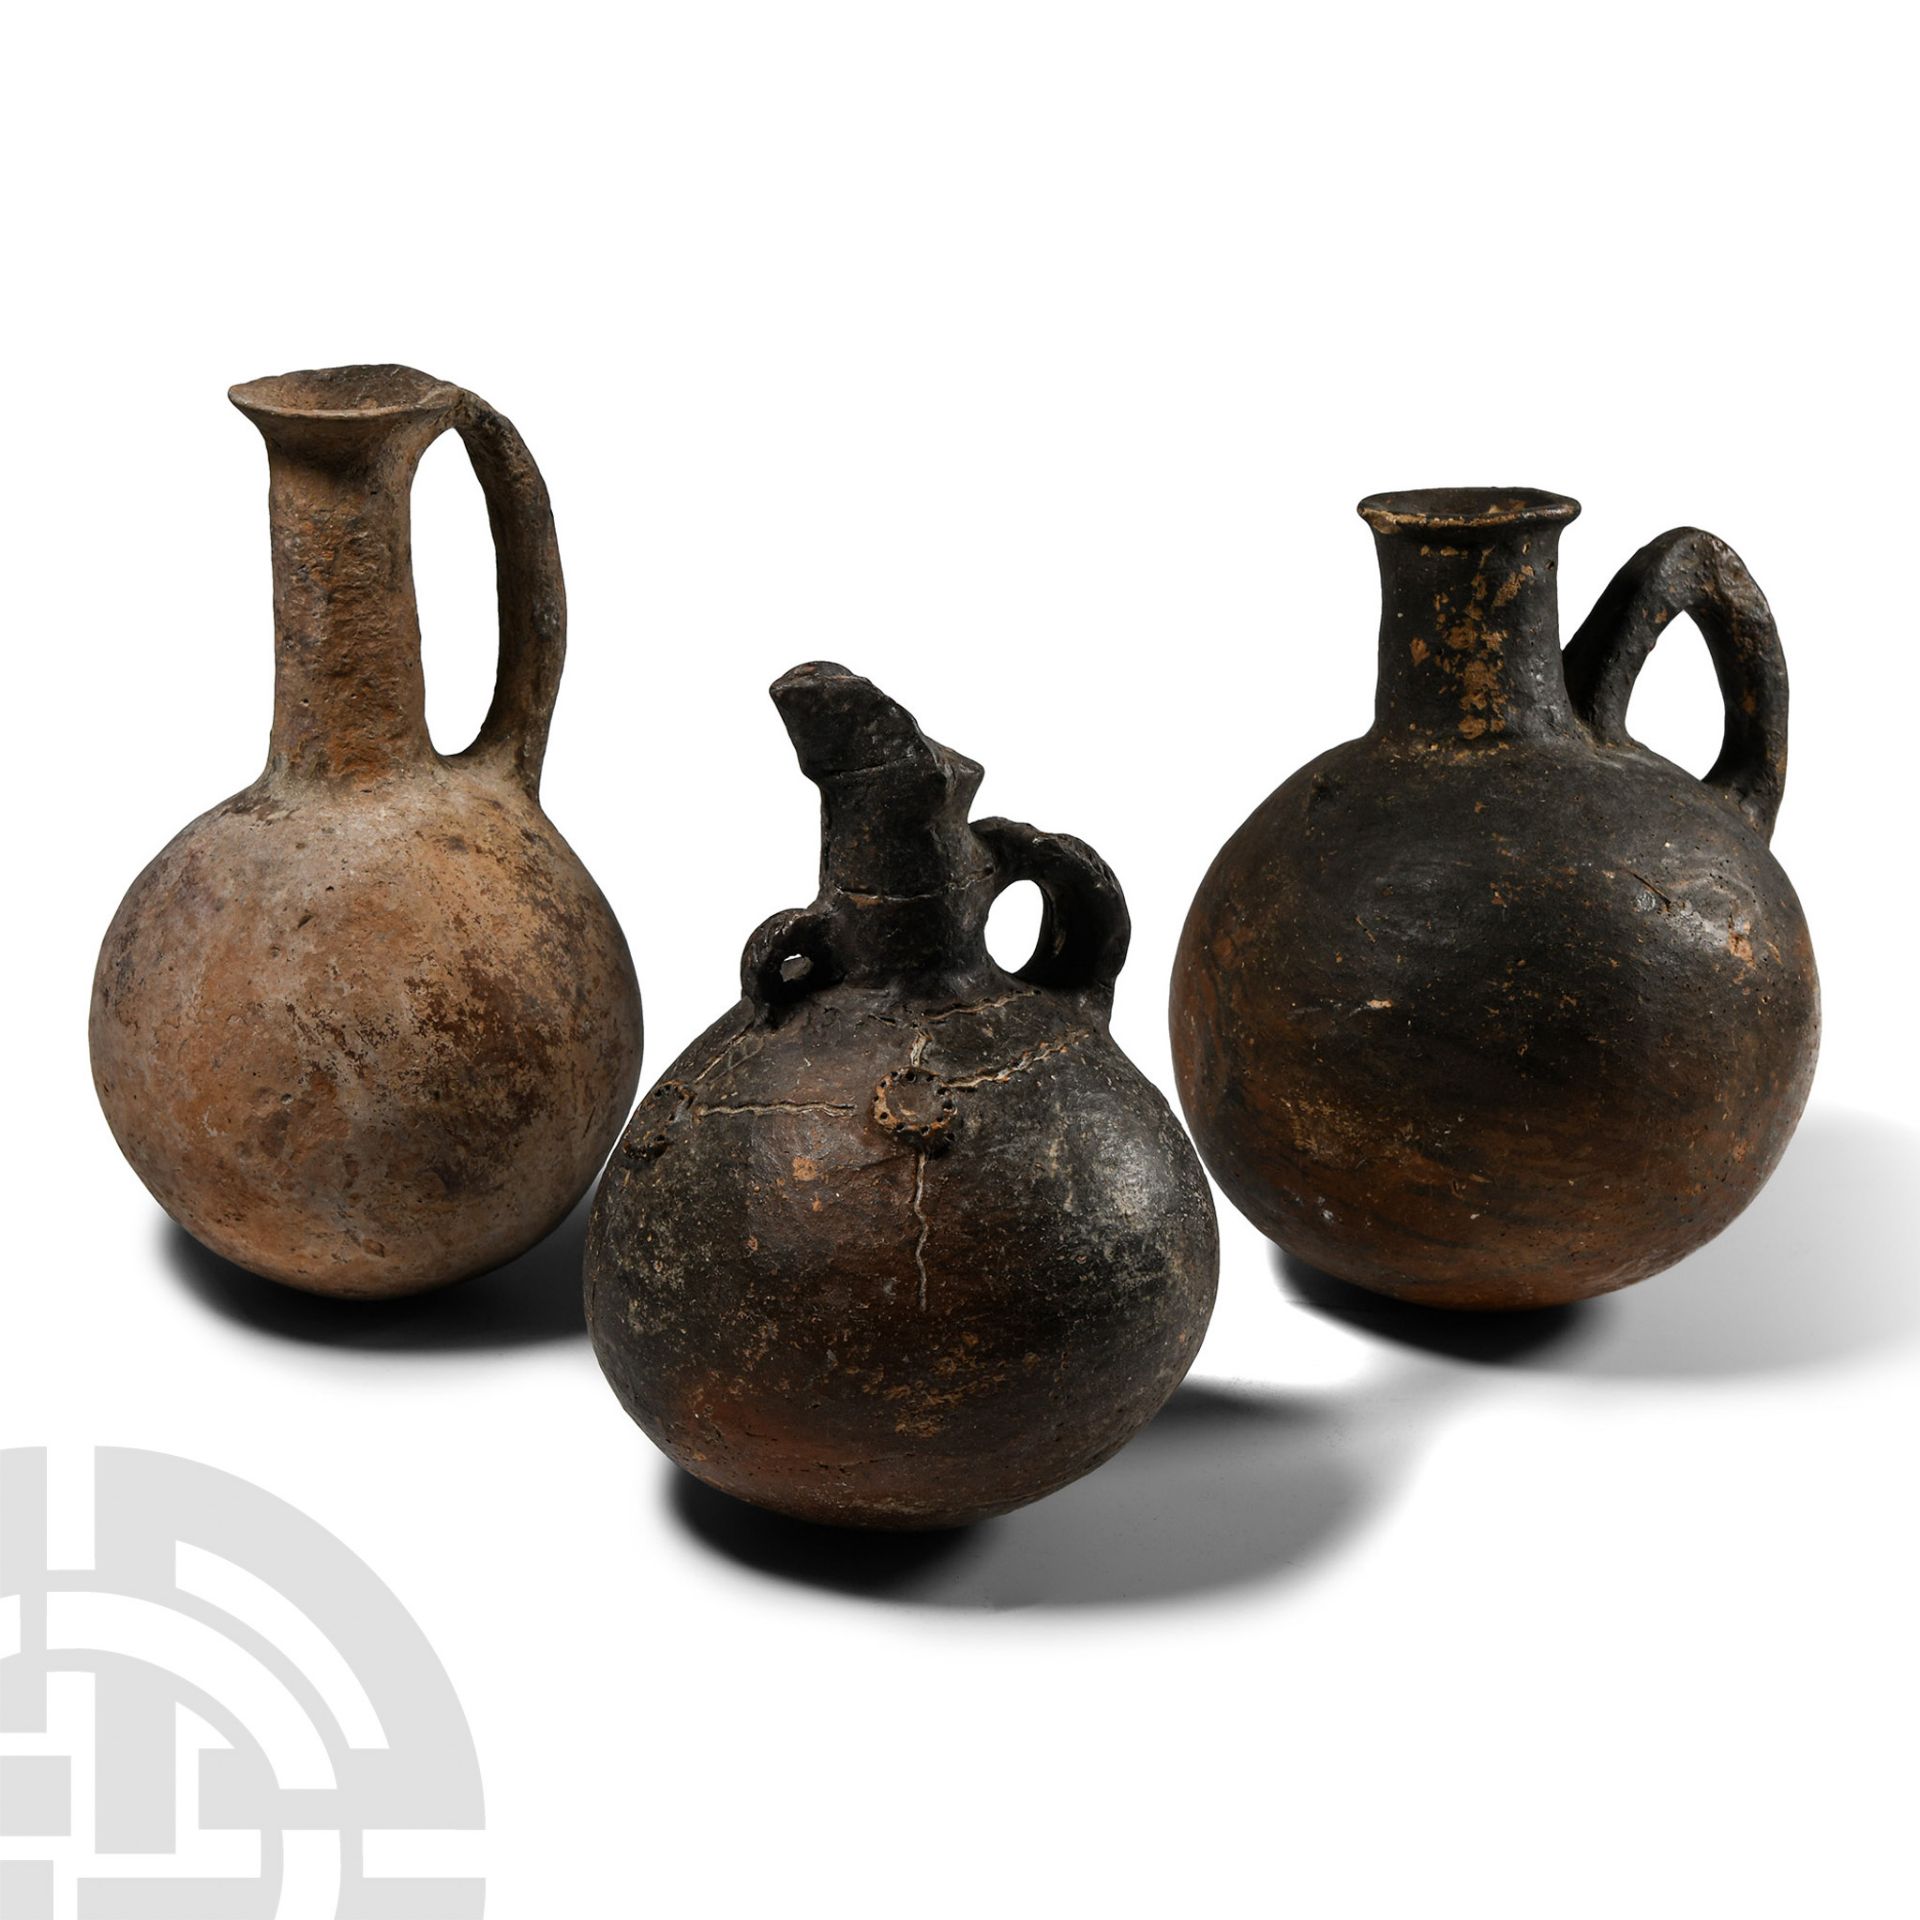 Cypriot Red Burnished Ware Round-Bottomed Flask Group